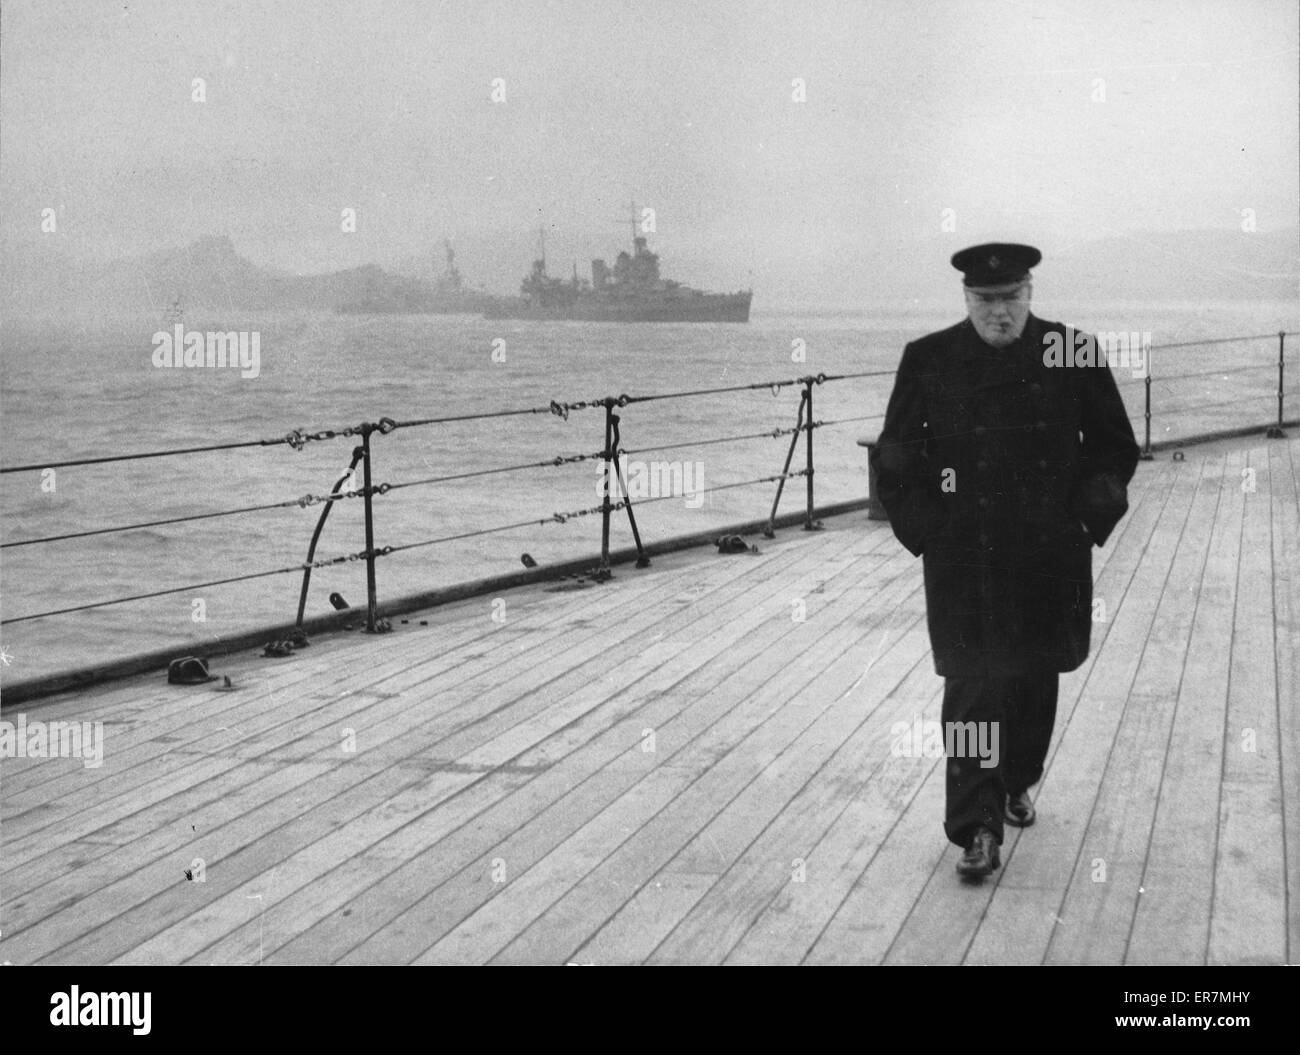 The Prime Minister's return journey across the Atlantic. Photograph shows Prime Minister Winston Churchill, full-length, walking the deck of HMS. Prince of Wales during the Atlantic Conference. Date 1941. 1941 Stock Photo